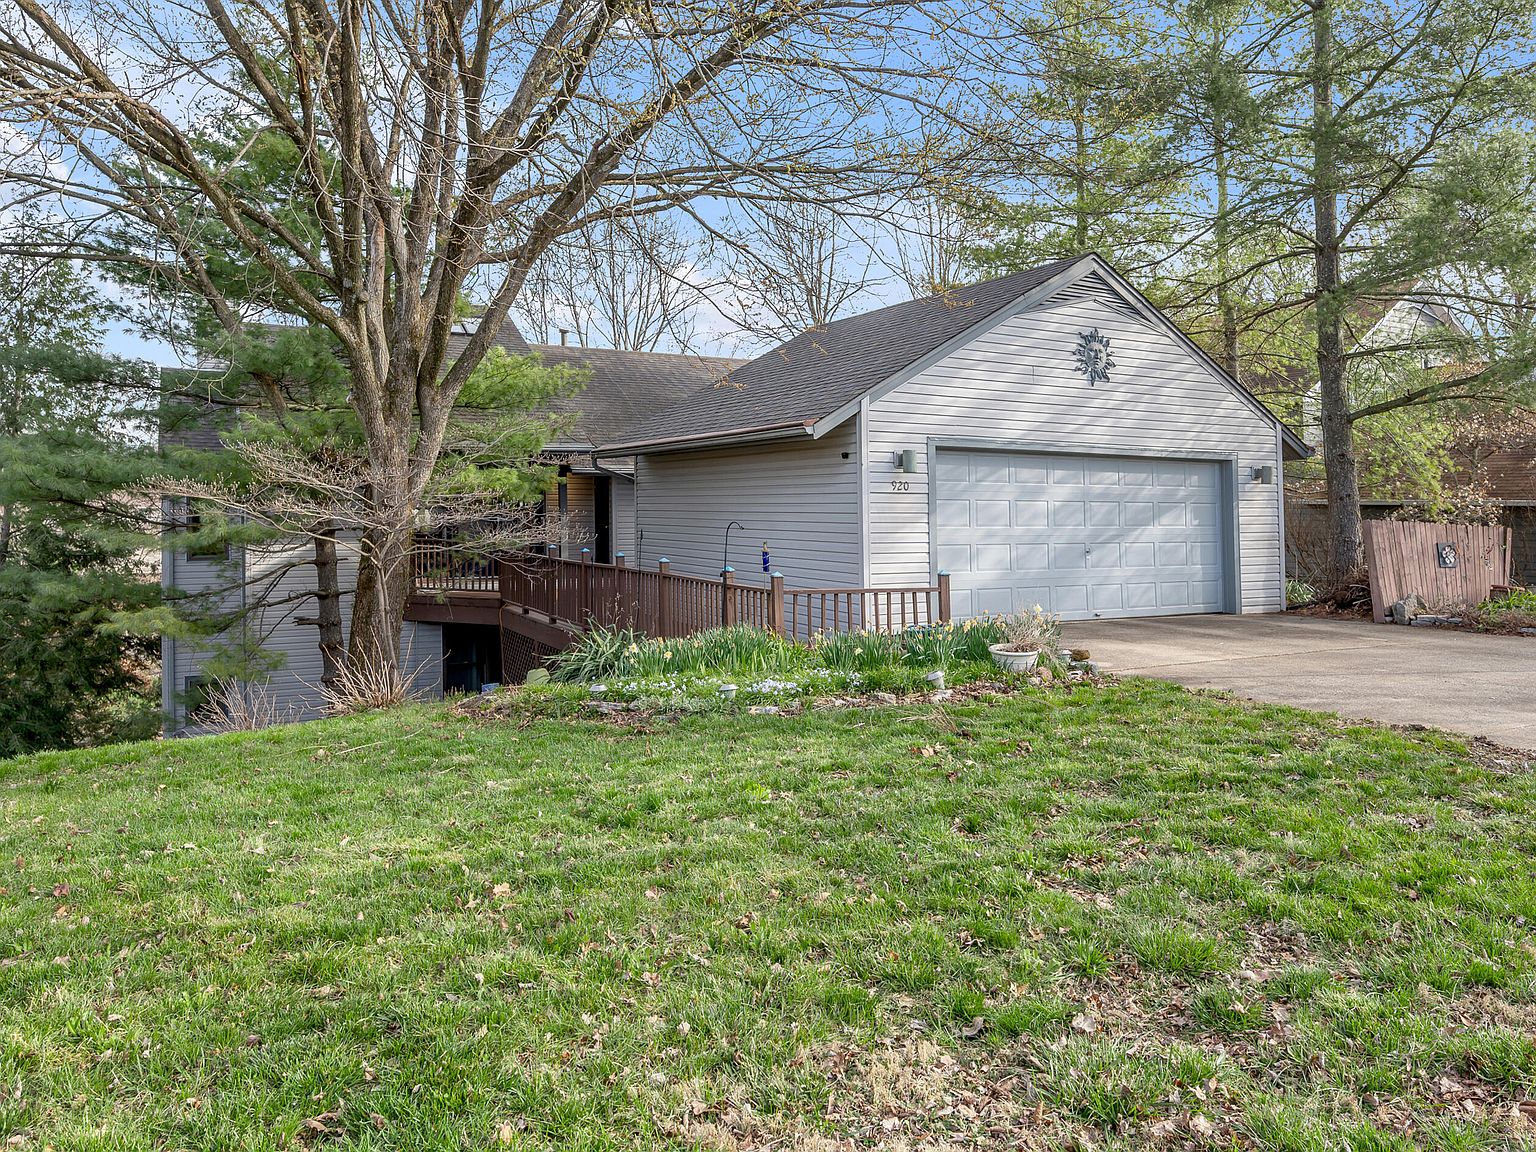 920 Witthuhn Way, Lexington, KY 40503 | Zillow